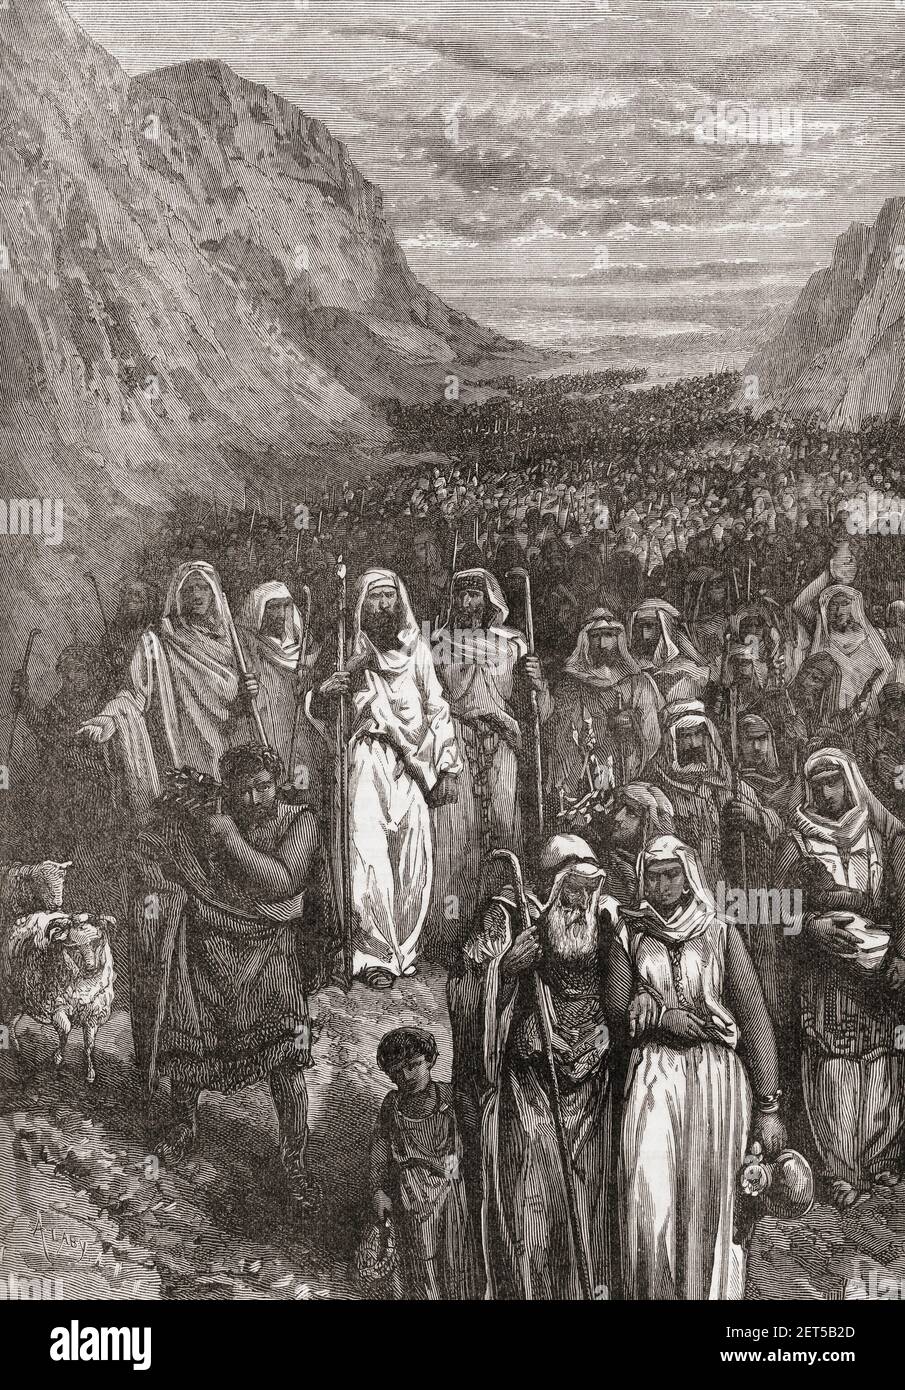 March of the Israelites.  The prophet Moses leads the Israelites out of Egypt and through the wilderness to Mount Sinai.  From Cassell's Universal History, published 1888. Stock Photo